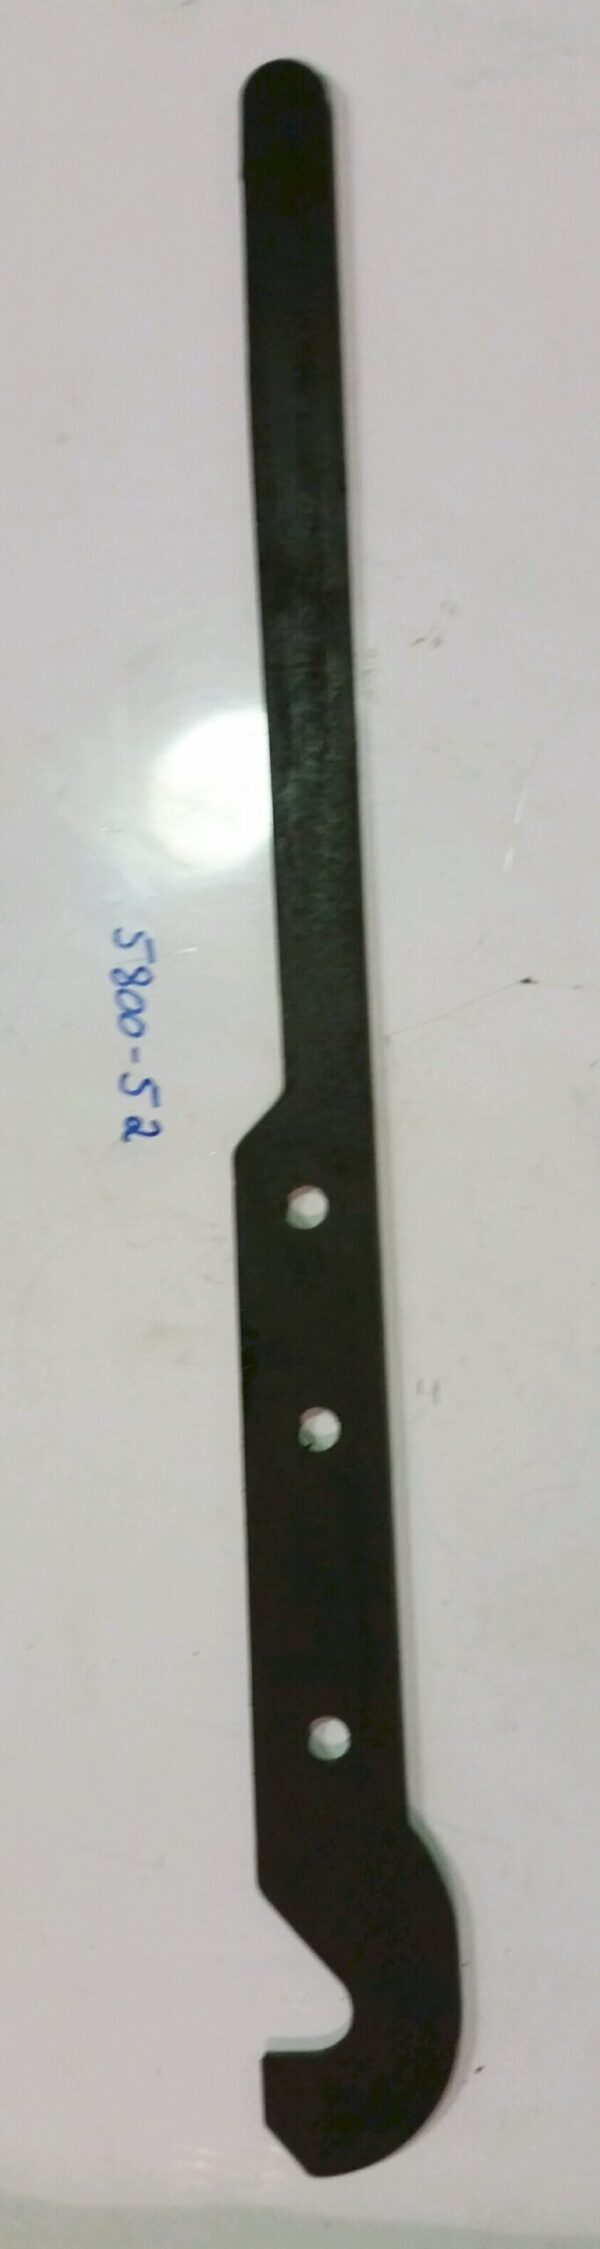 Container Latch Handle 5800-52